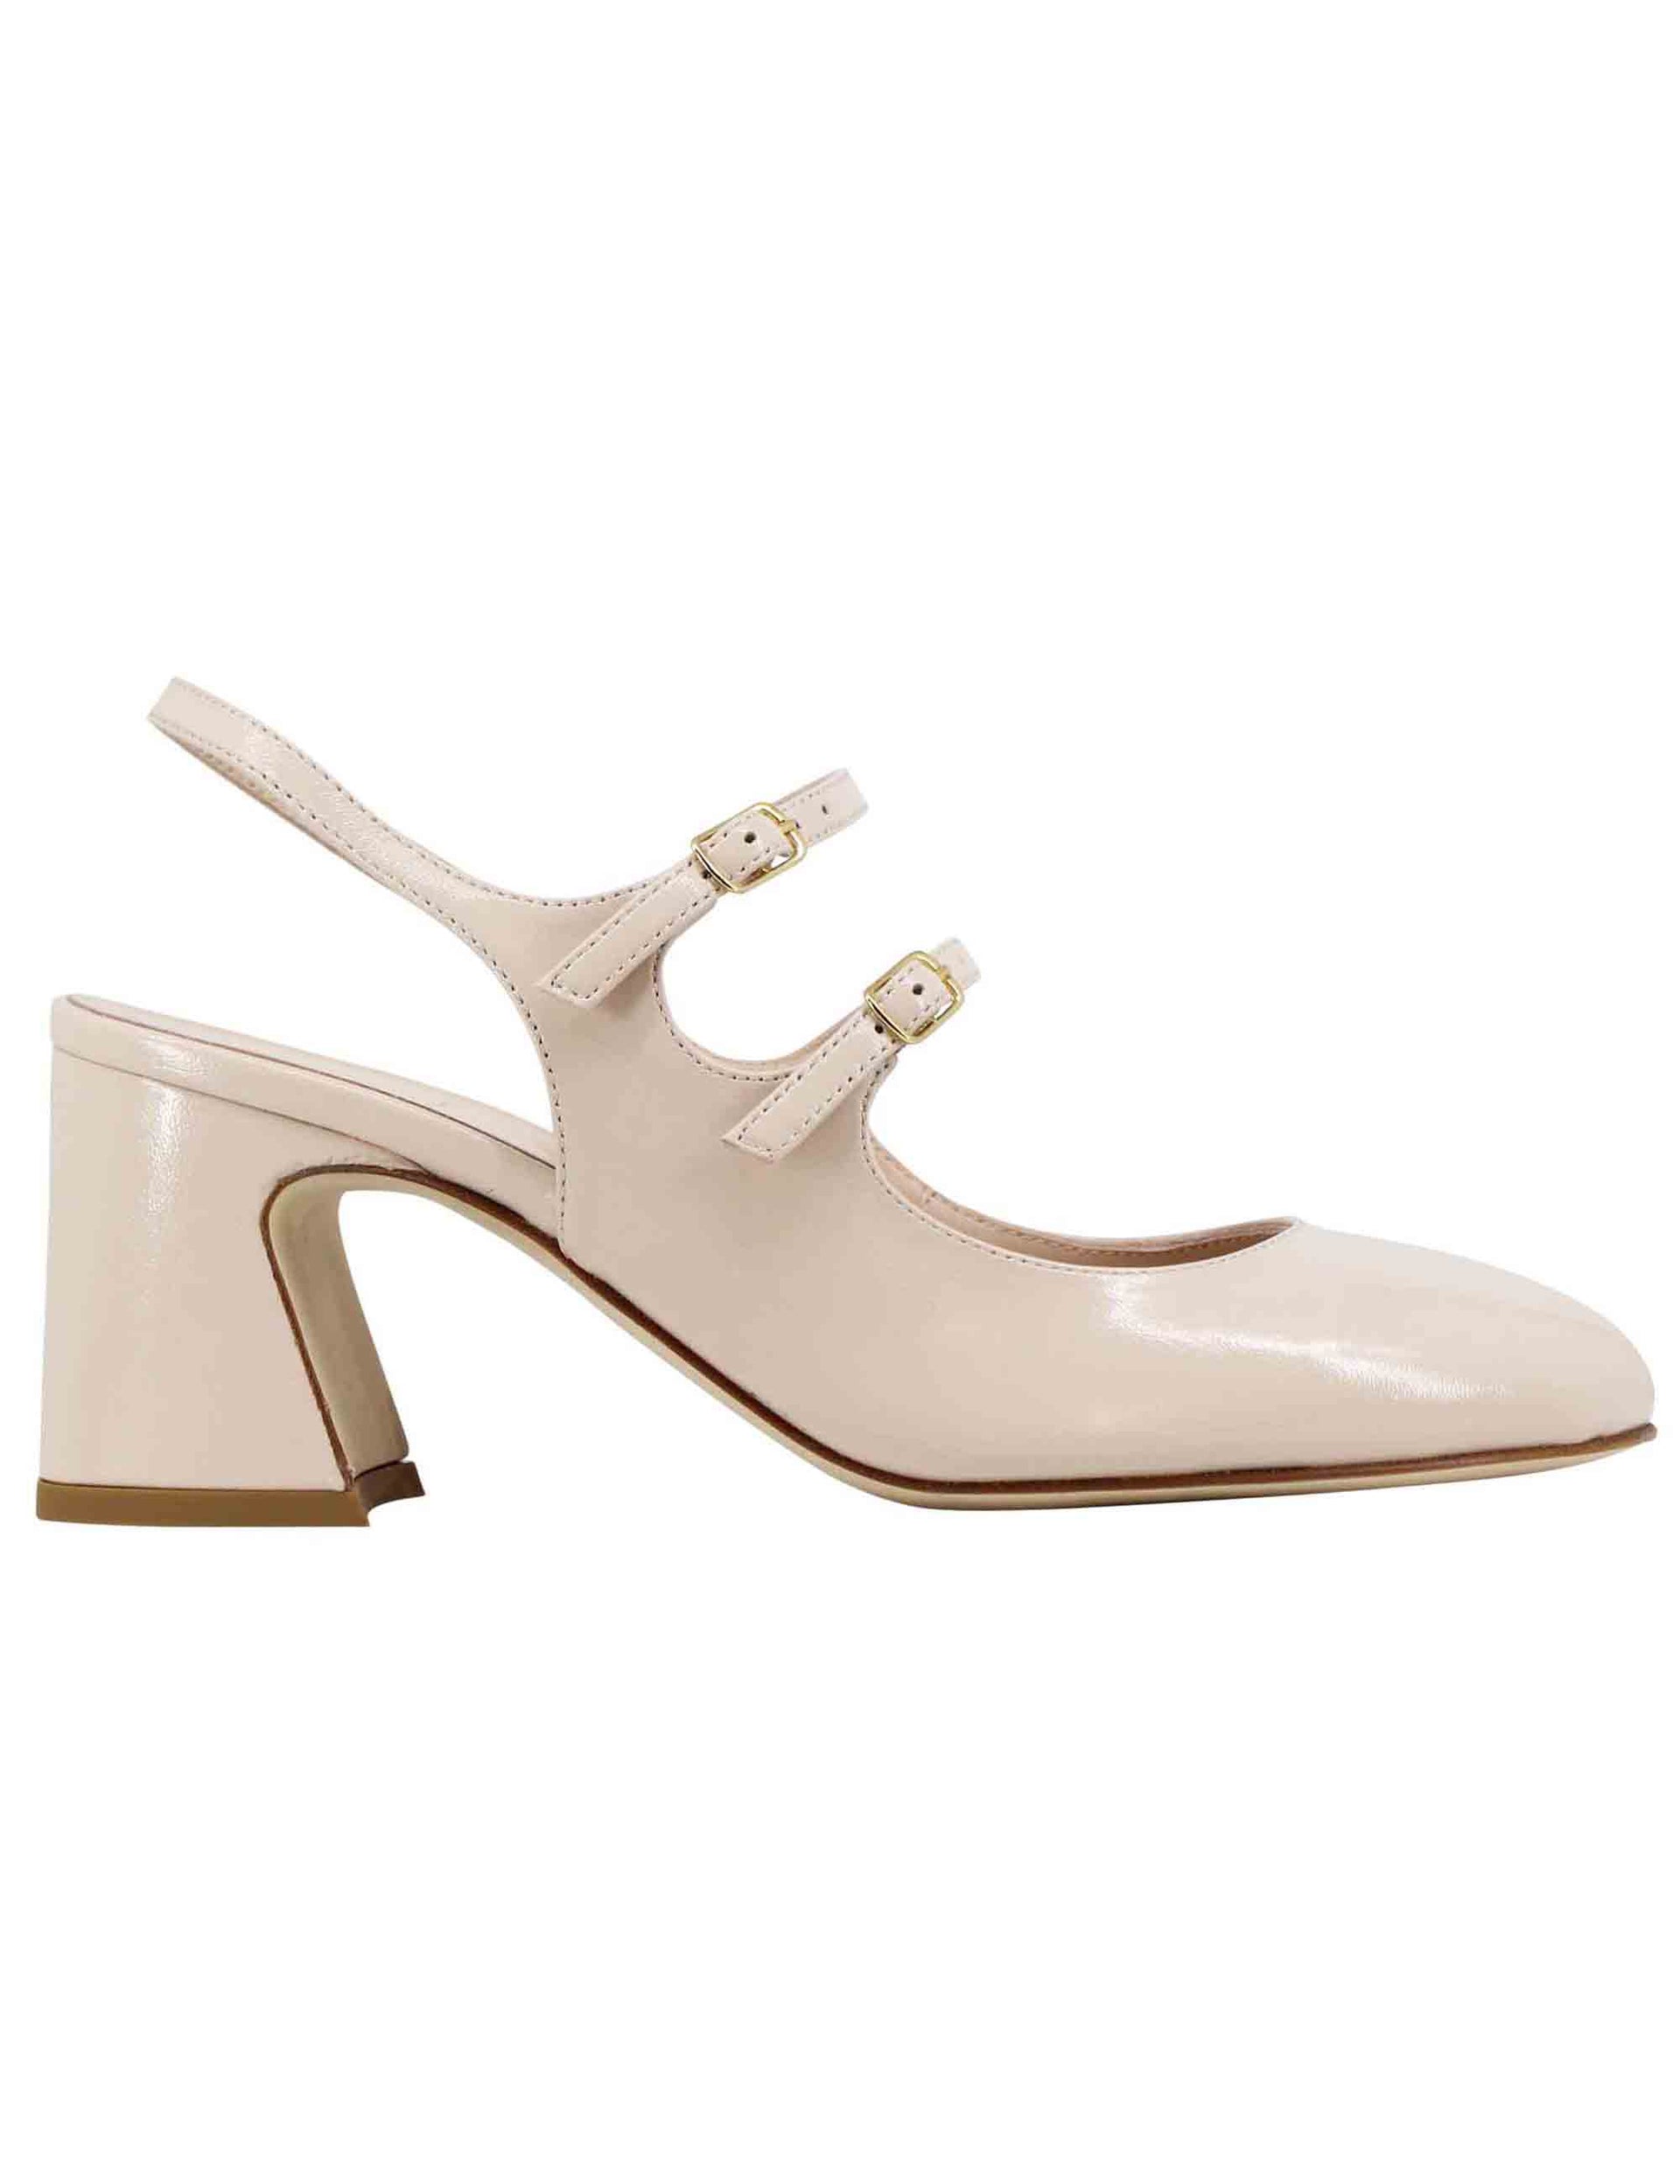 Women's slingback pumps in beige leather with round toe